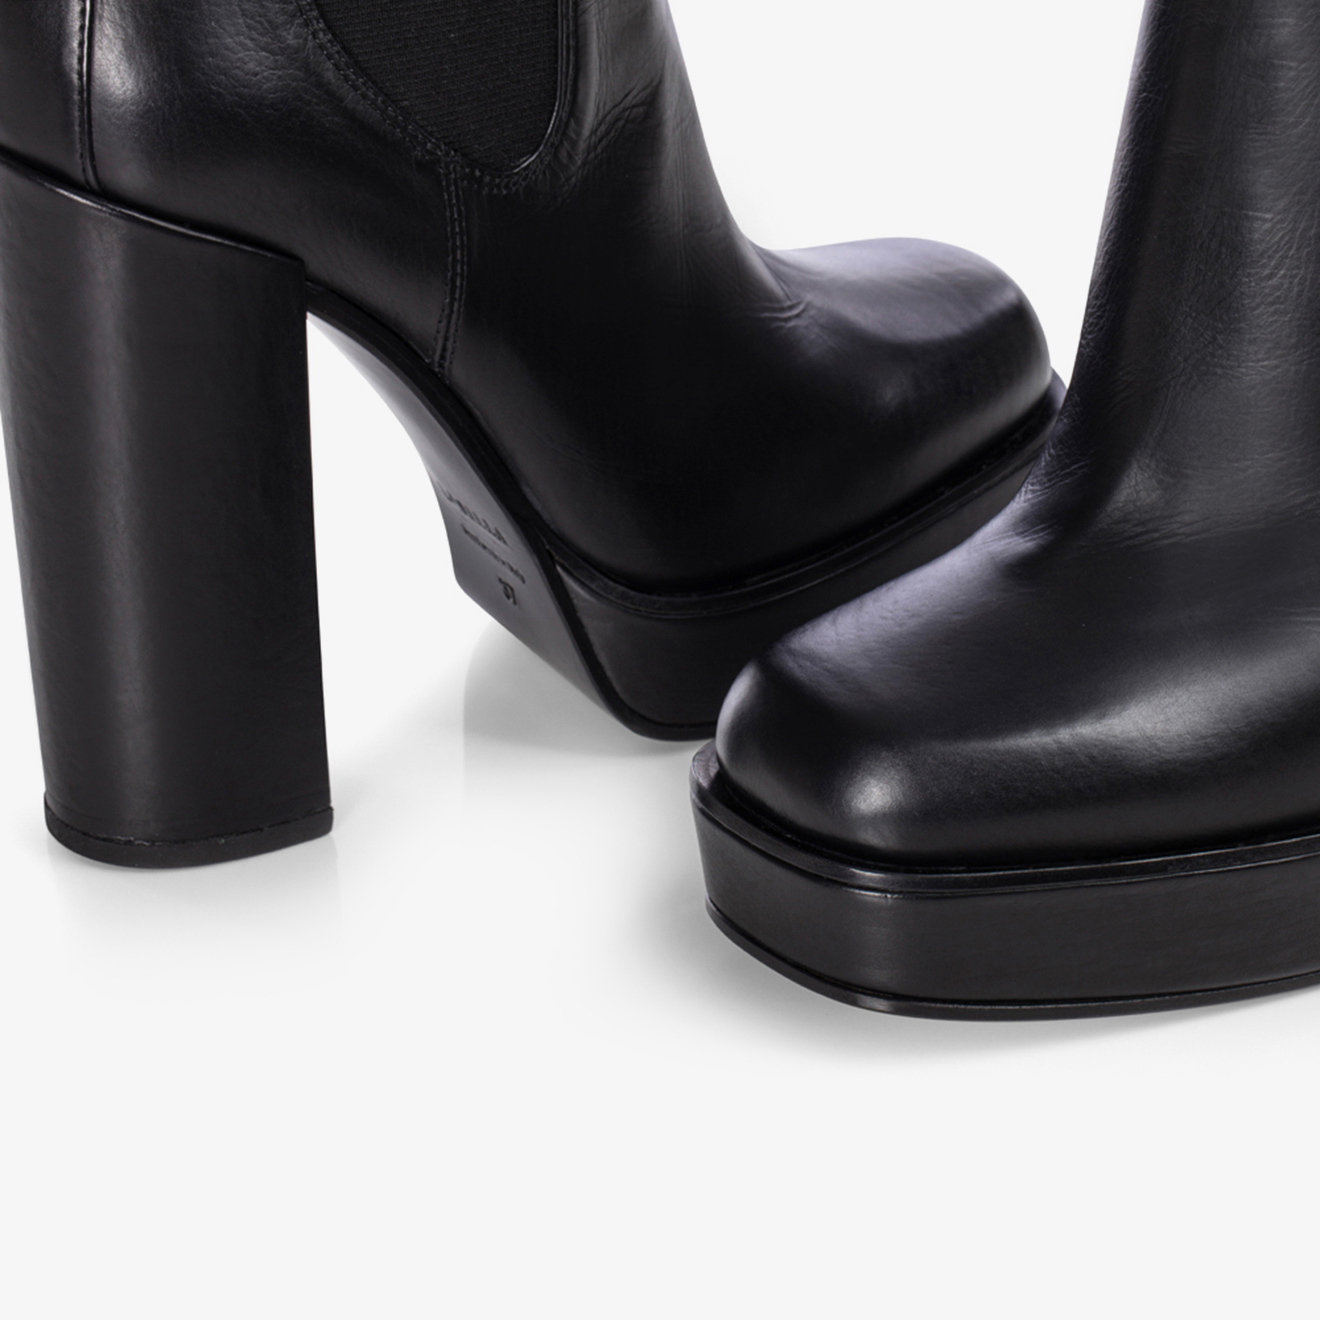 LANA ANKLE BOOT 130 mm - Le Silla official outlet